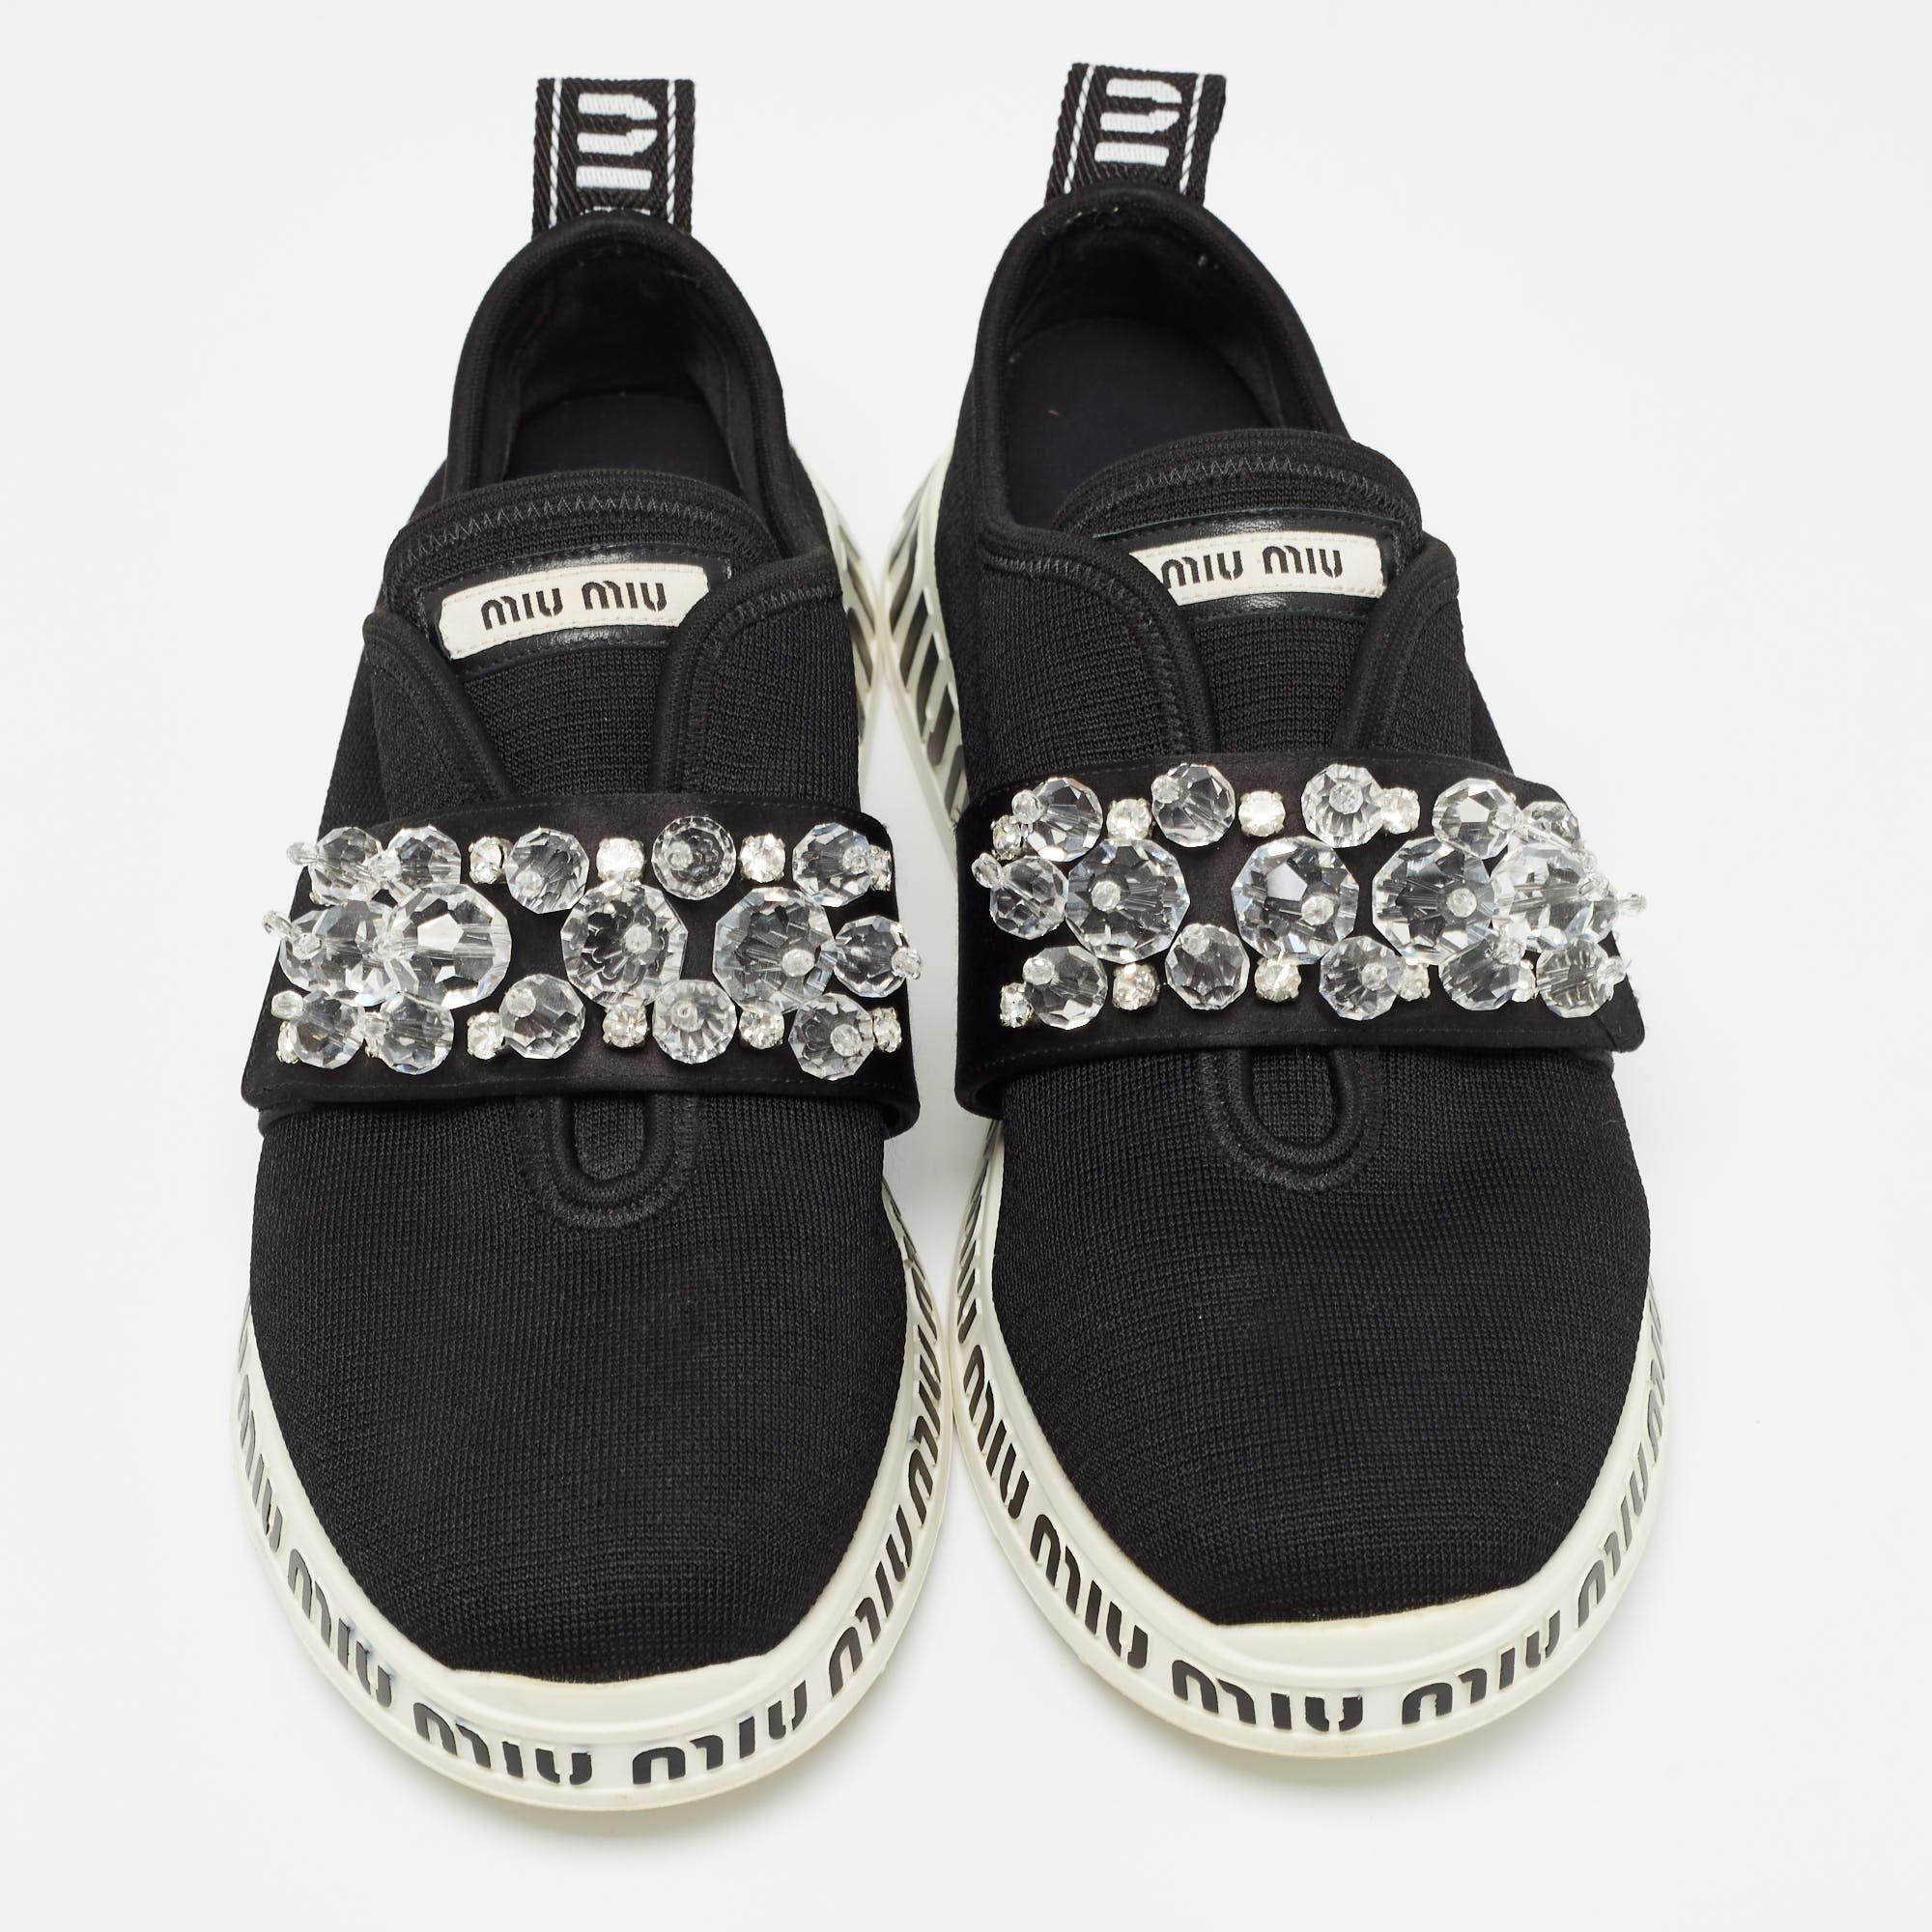 Miu Miu Black Fabric and Satin Crystal Embellished Slip On Sneakers Size 38.5 For Sale 1